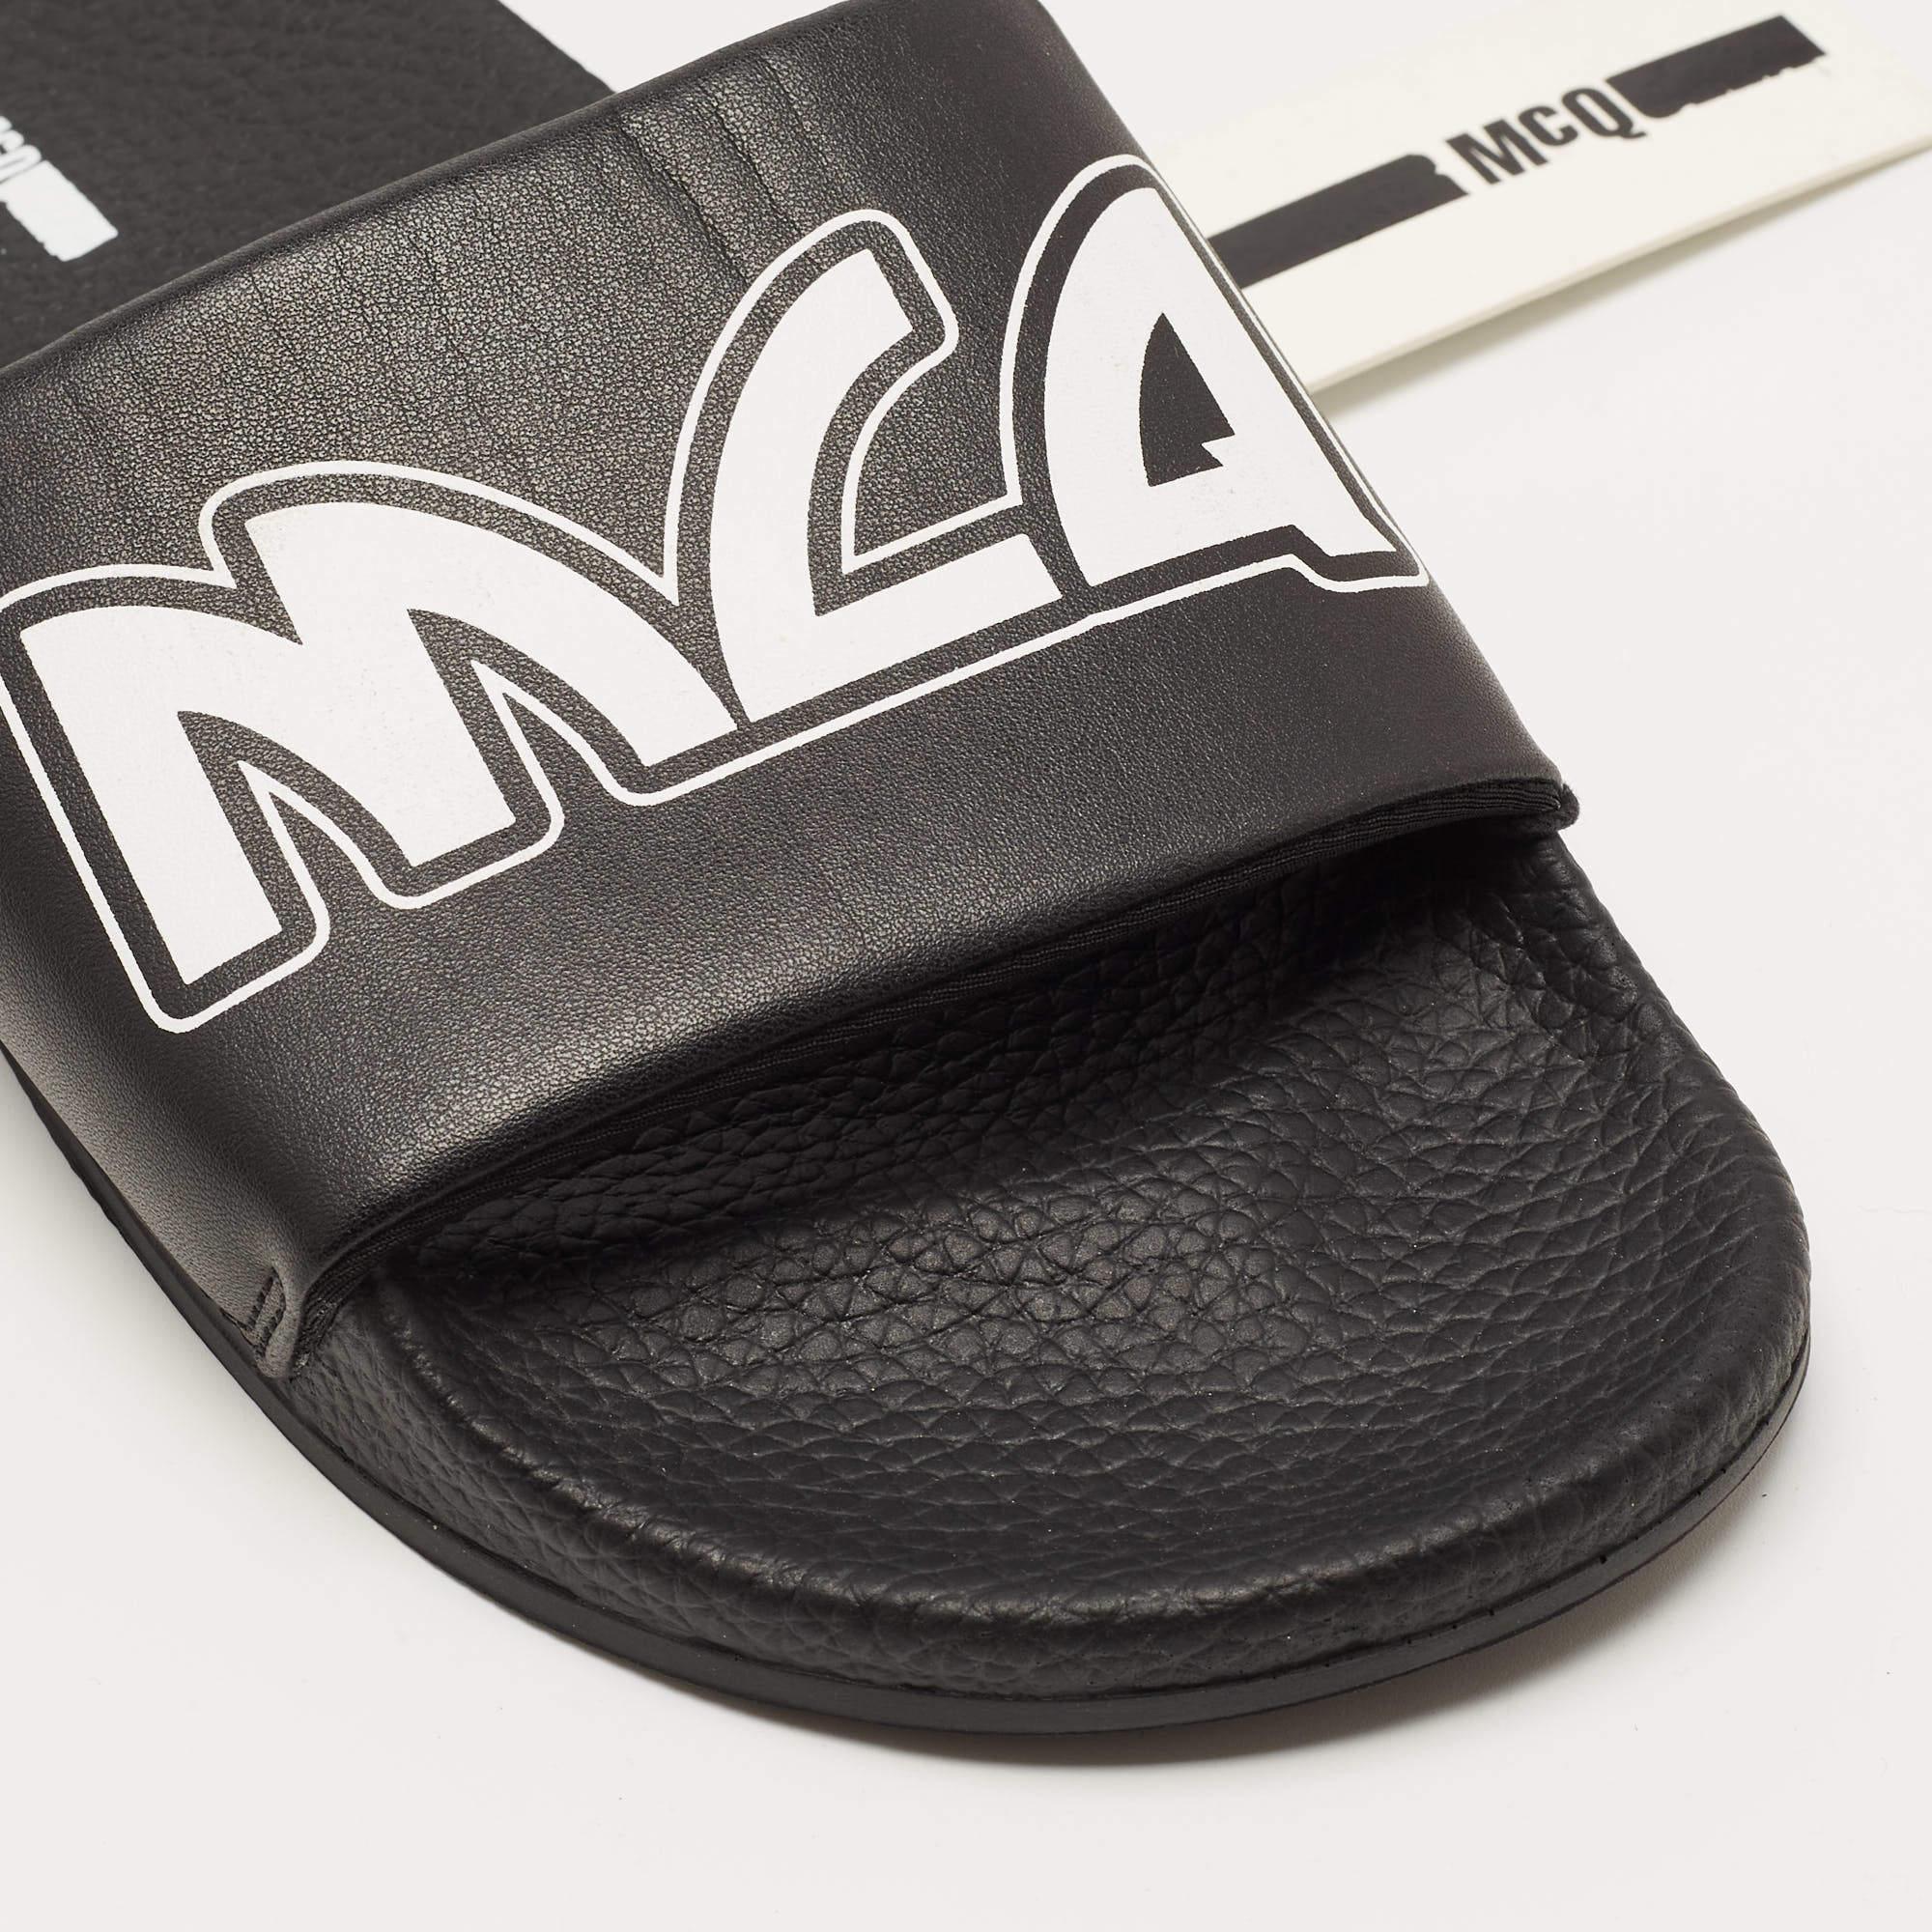 McQ by Alexander McQueen Black Faux Leather Logo Slides Size 42 3